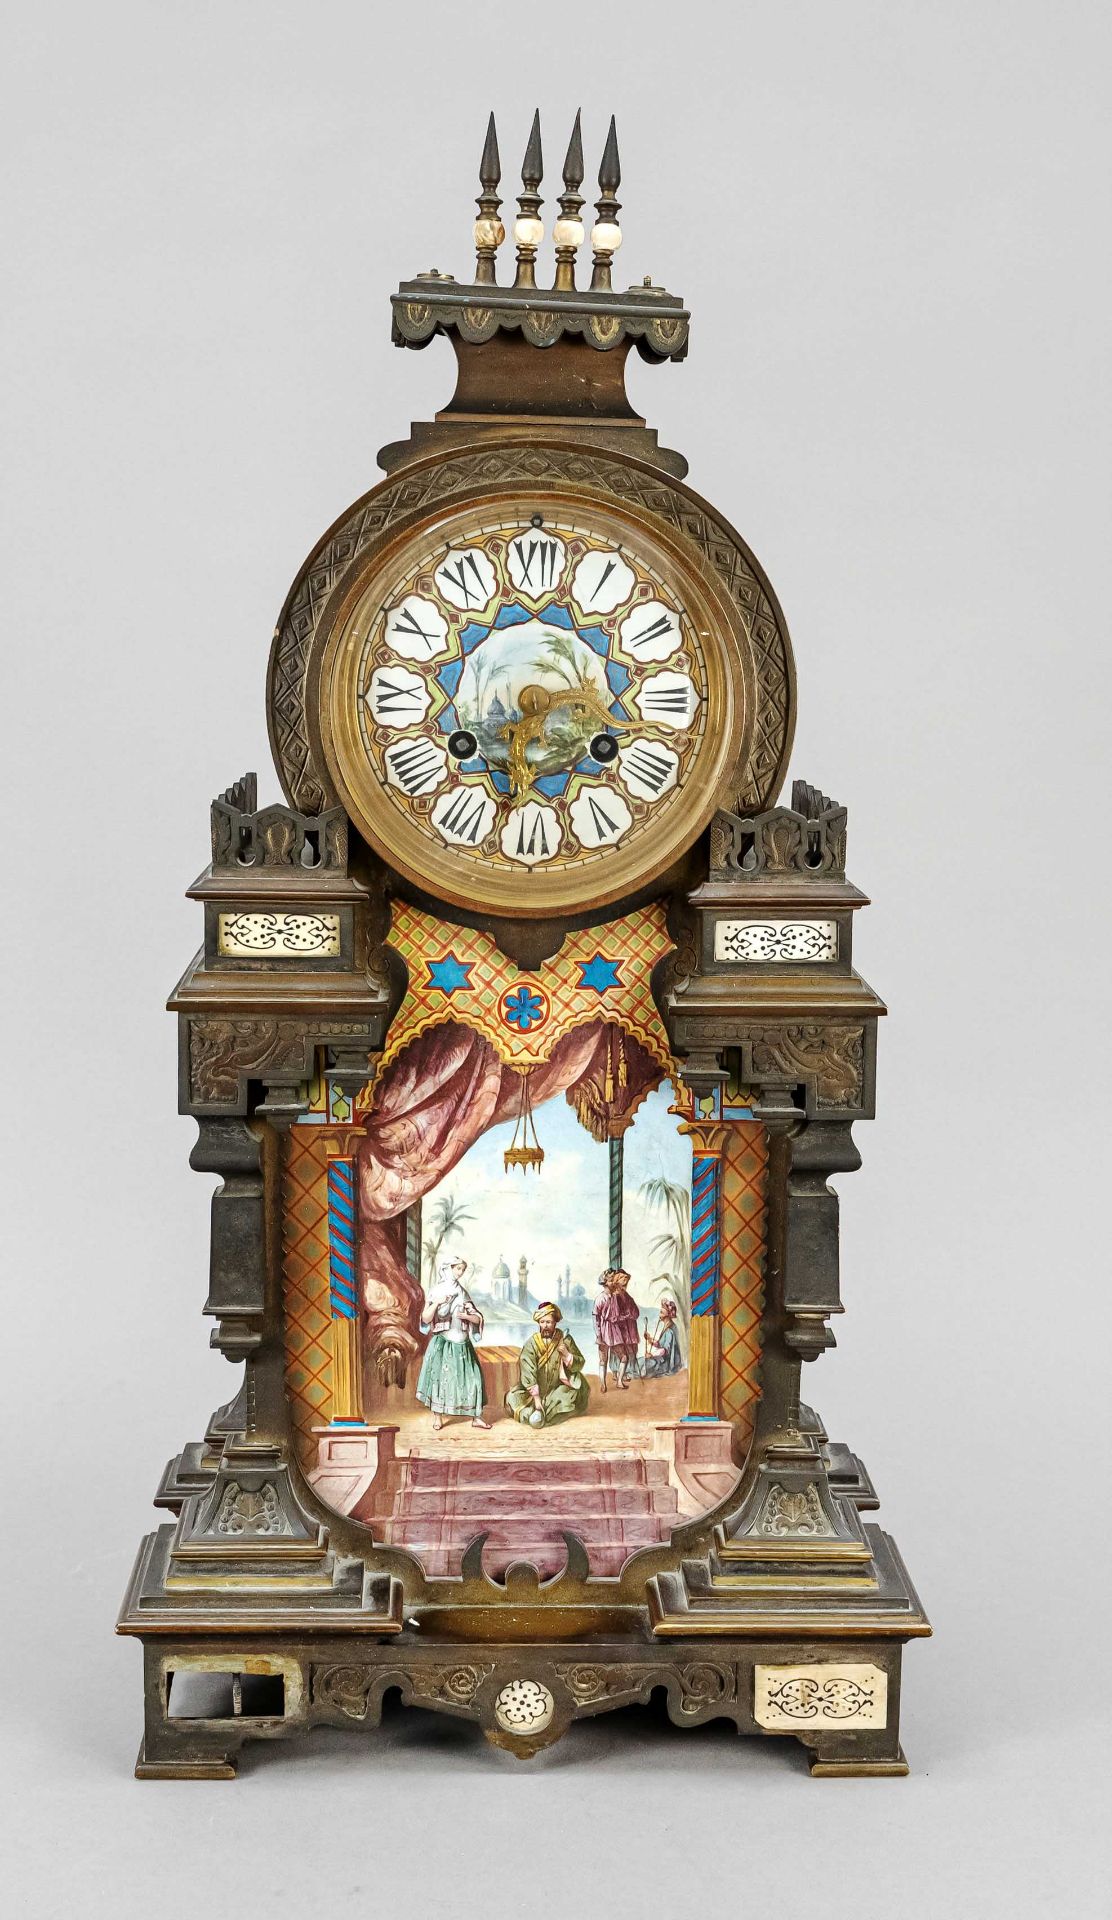 Tiffany & Co. large bronze table clock, movement number 3117, 2nd half of 19th c., between the